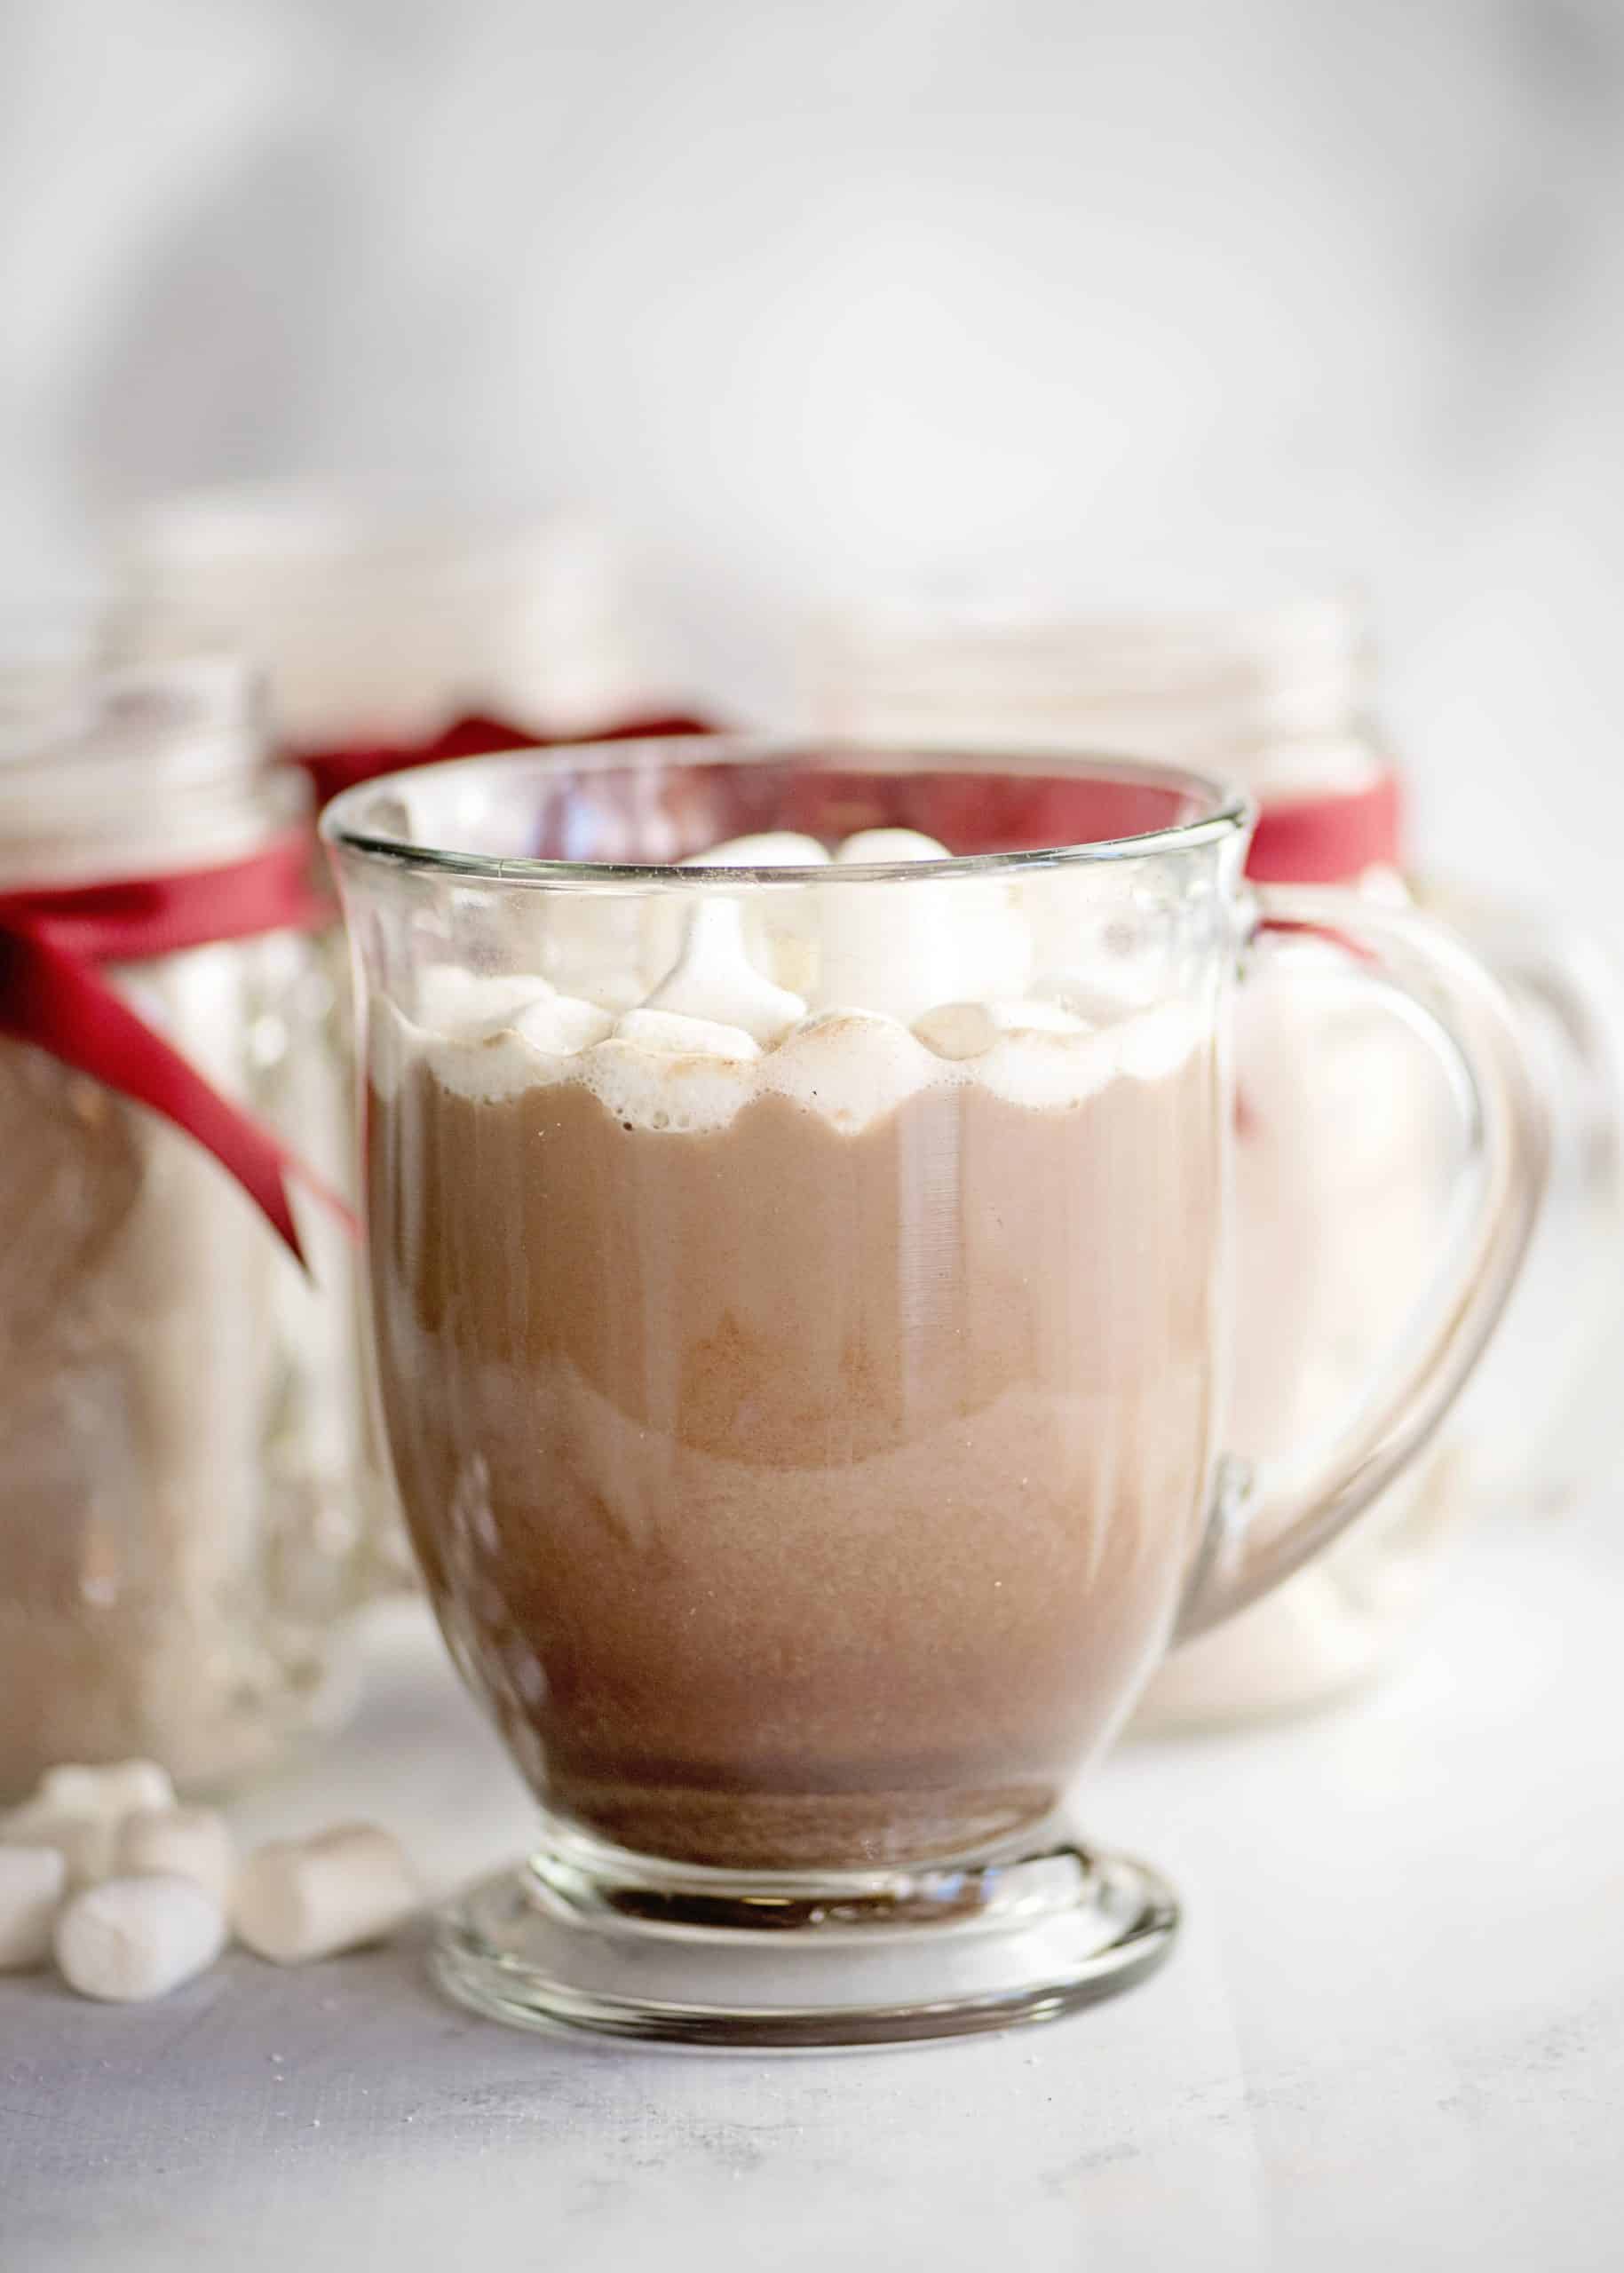 Nestlé® Hot Cocoa, Coffee and Beverages